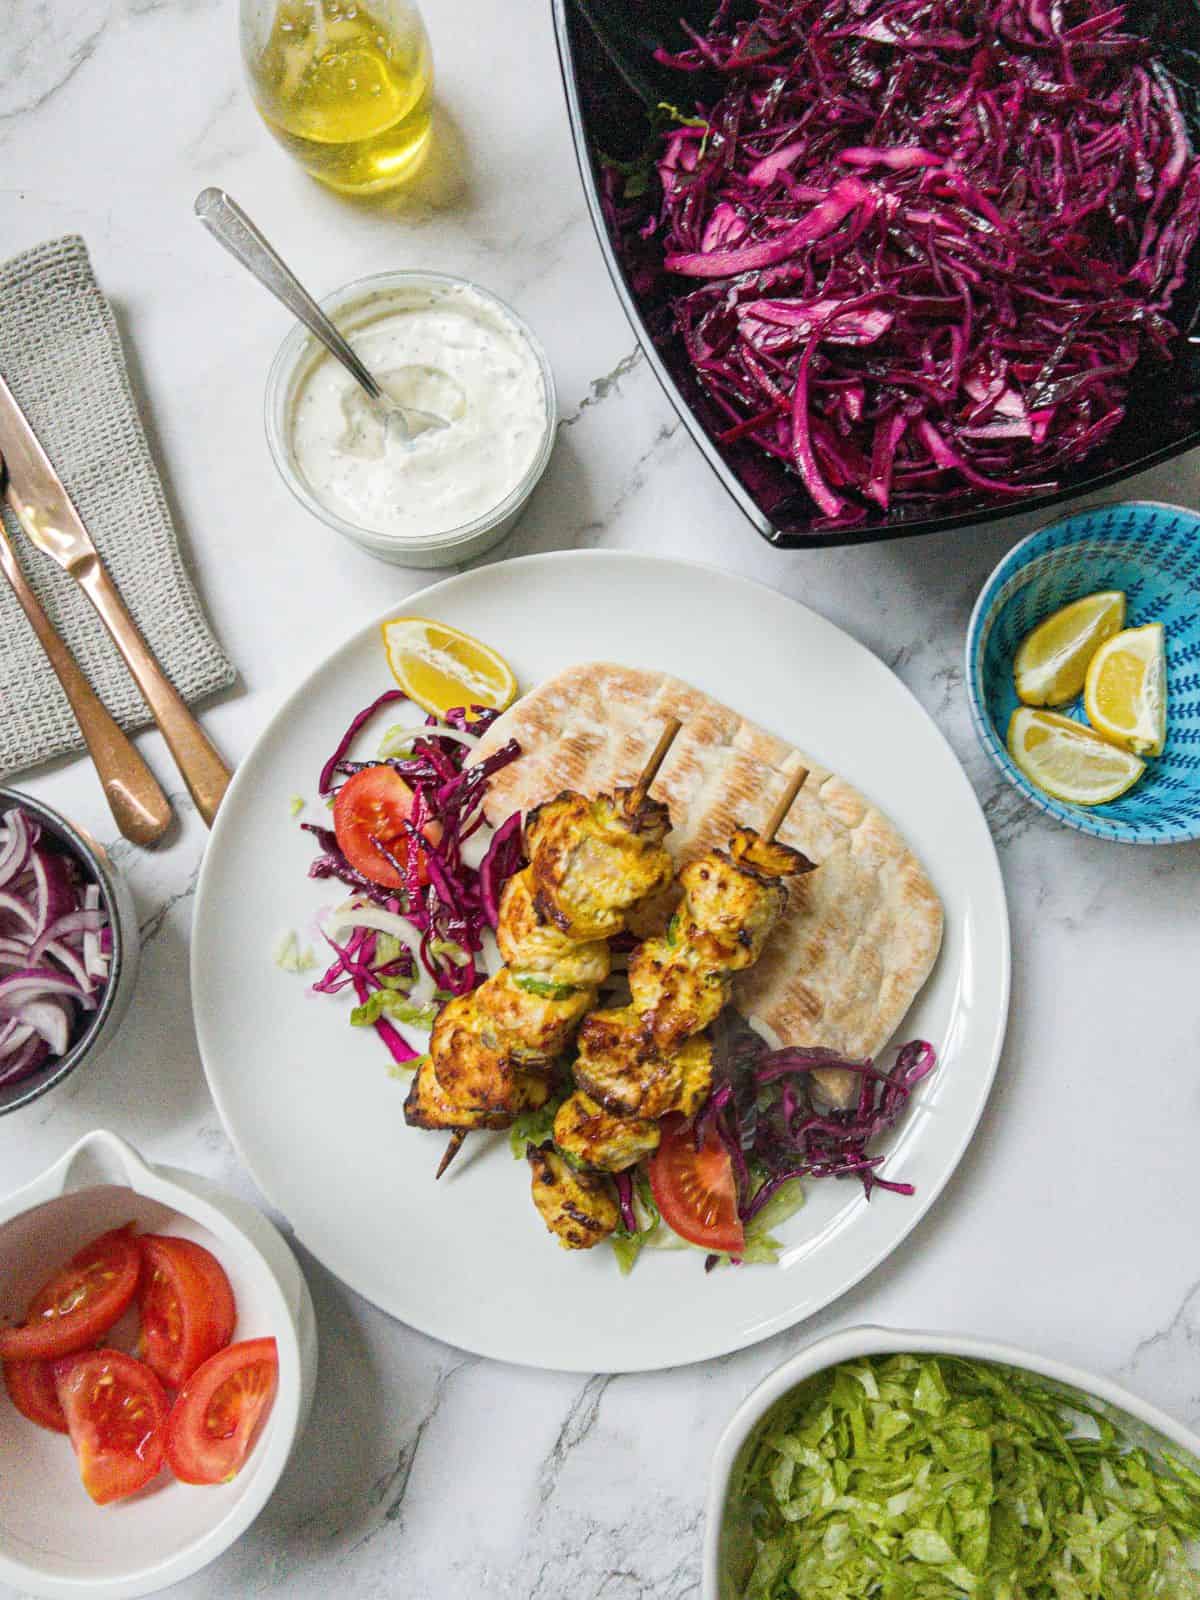 Two chicken shish kebabs on sticks laying on top of salad and pitta bread on a white plate. With a bowl of red cabbage, a pot of garlic sauce, lettuce and tomato in the background.